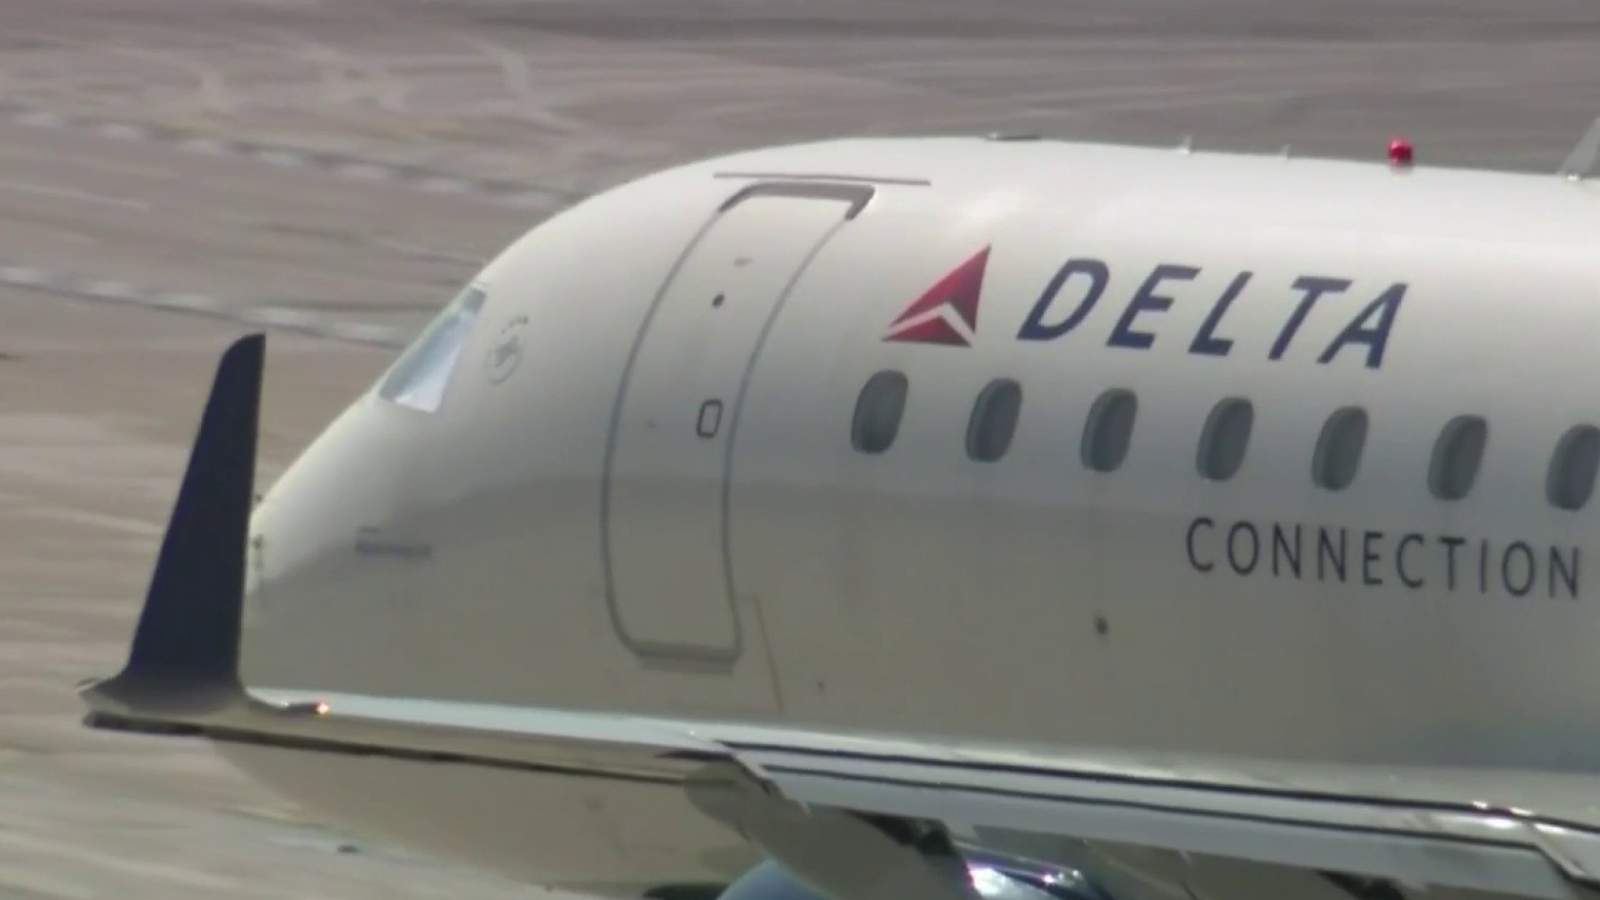 Delta Airlines cancels flights due to staff shortage, opens middle seats early